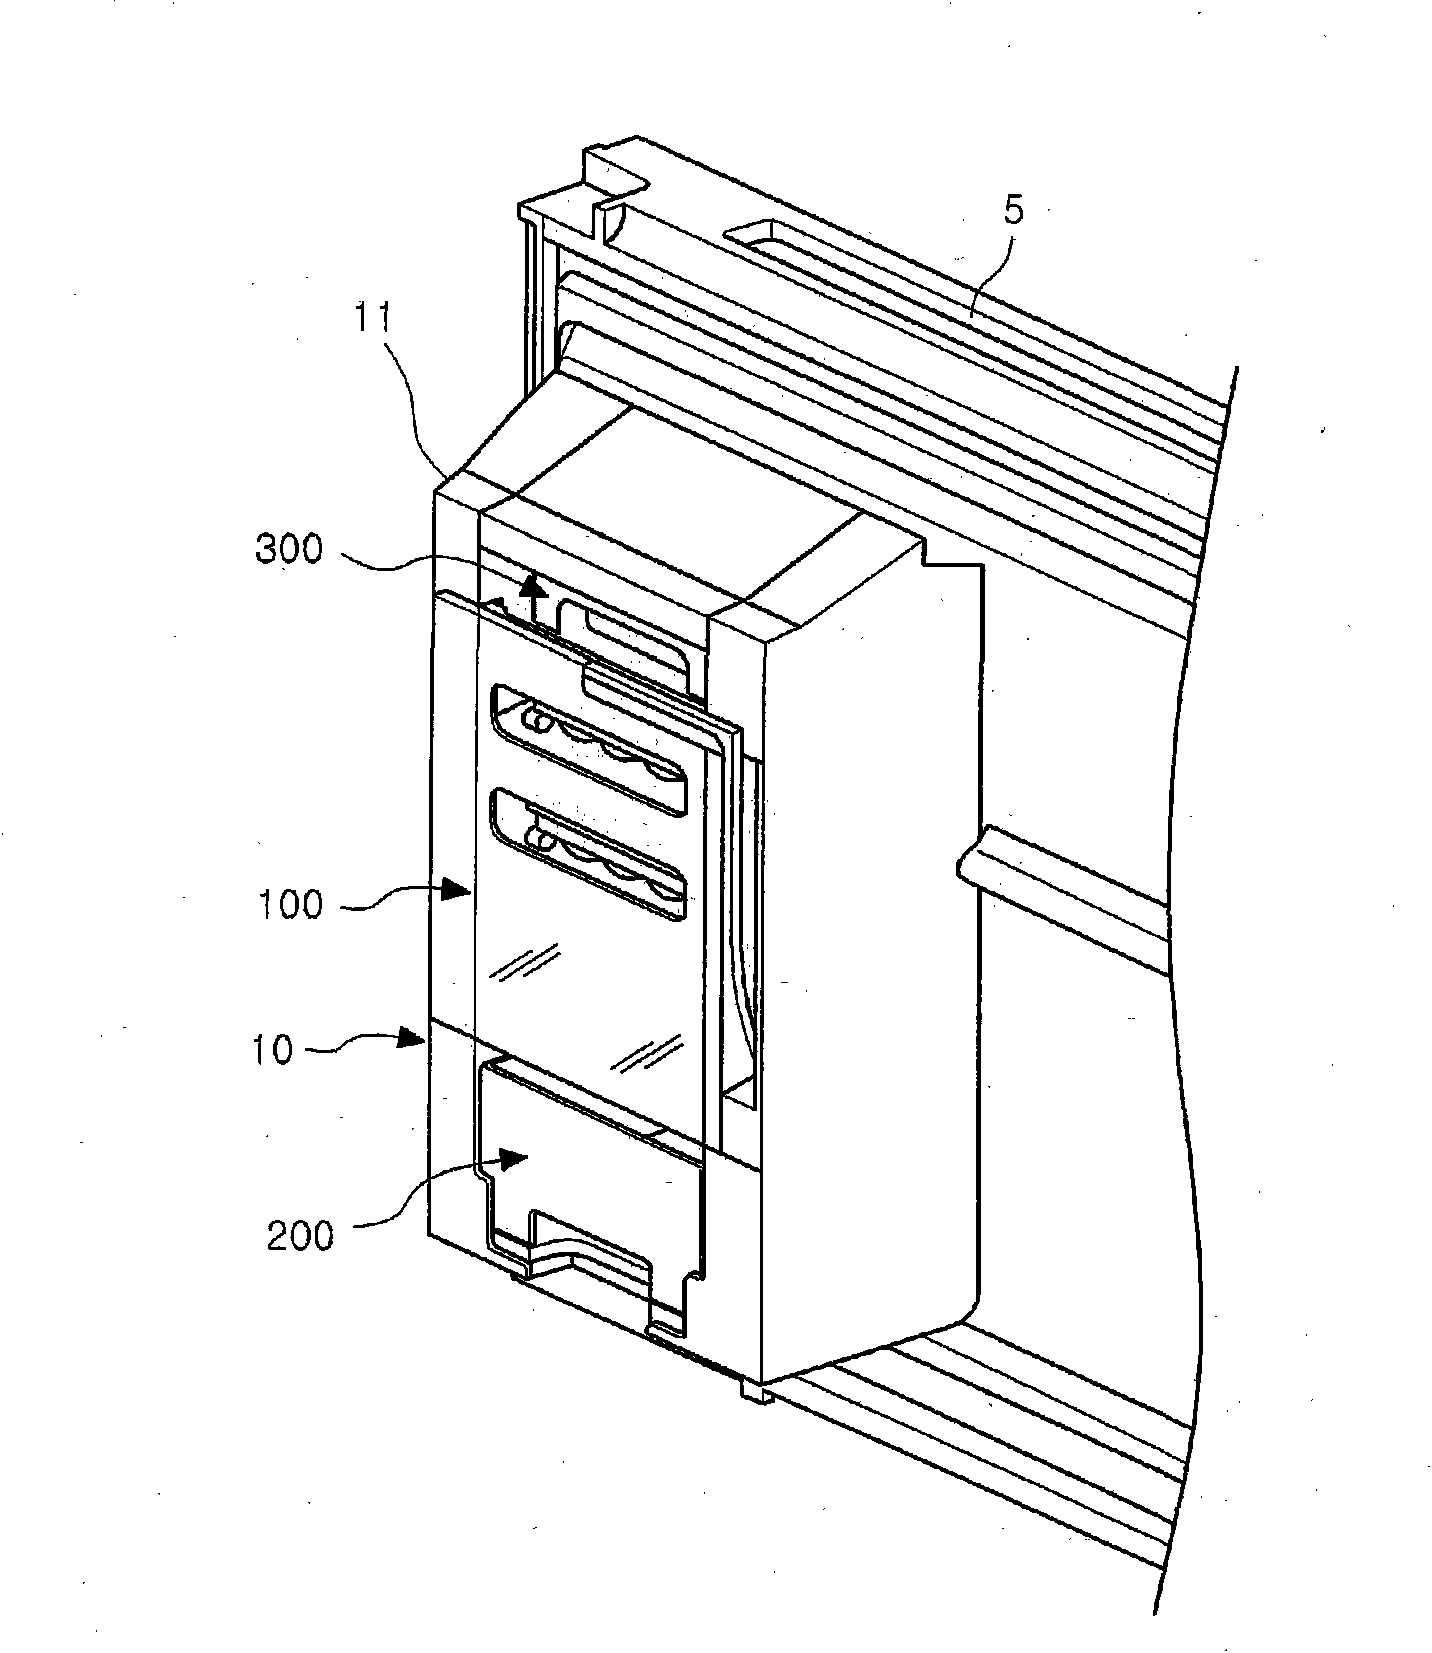 Ice-making assembly of refrigerator